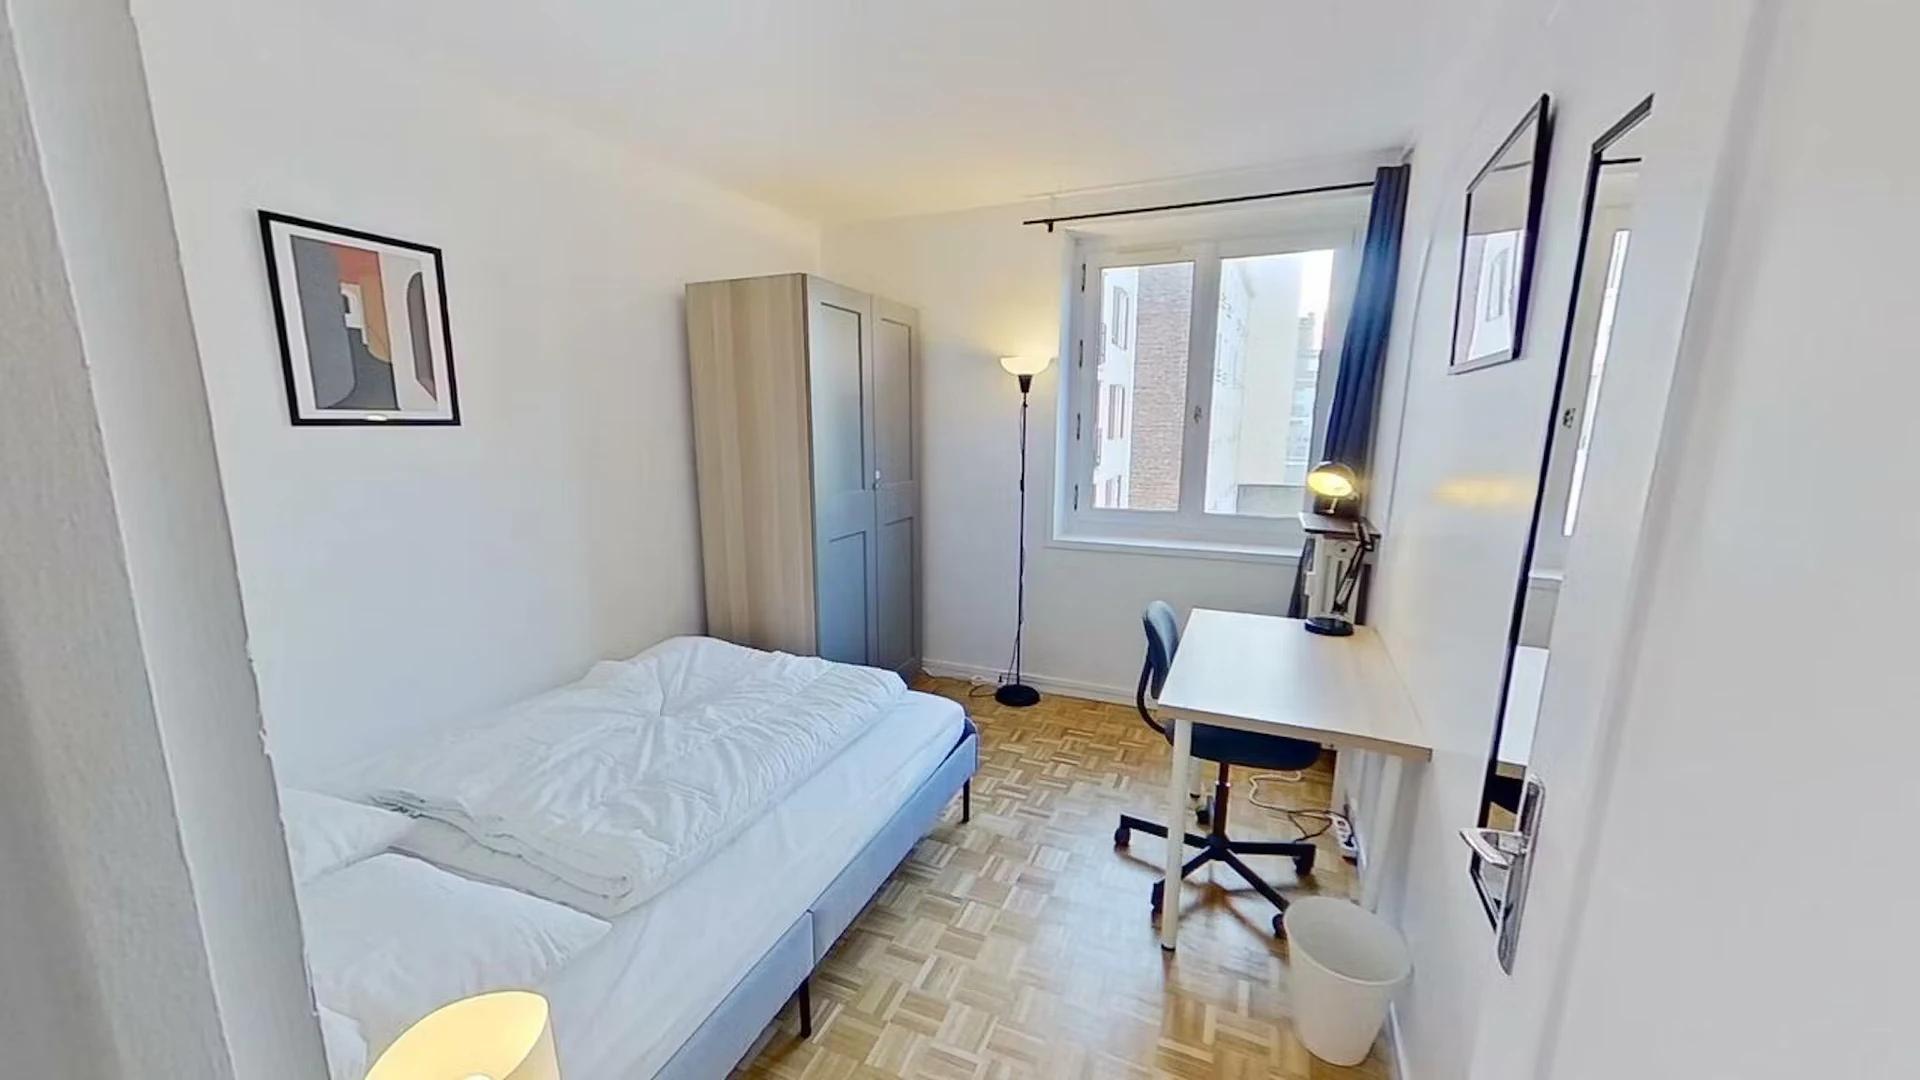 Cheap private room in le-havre